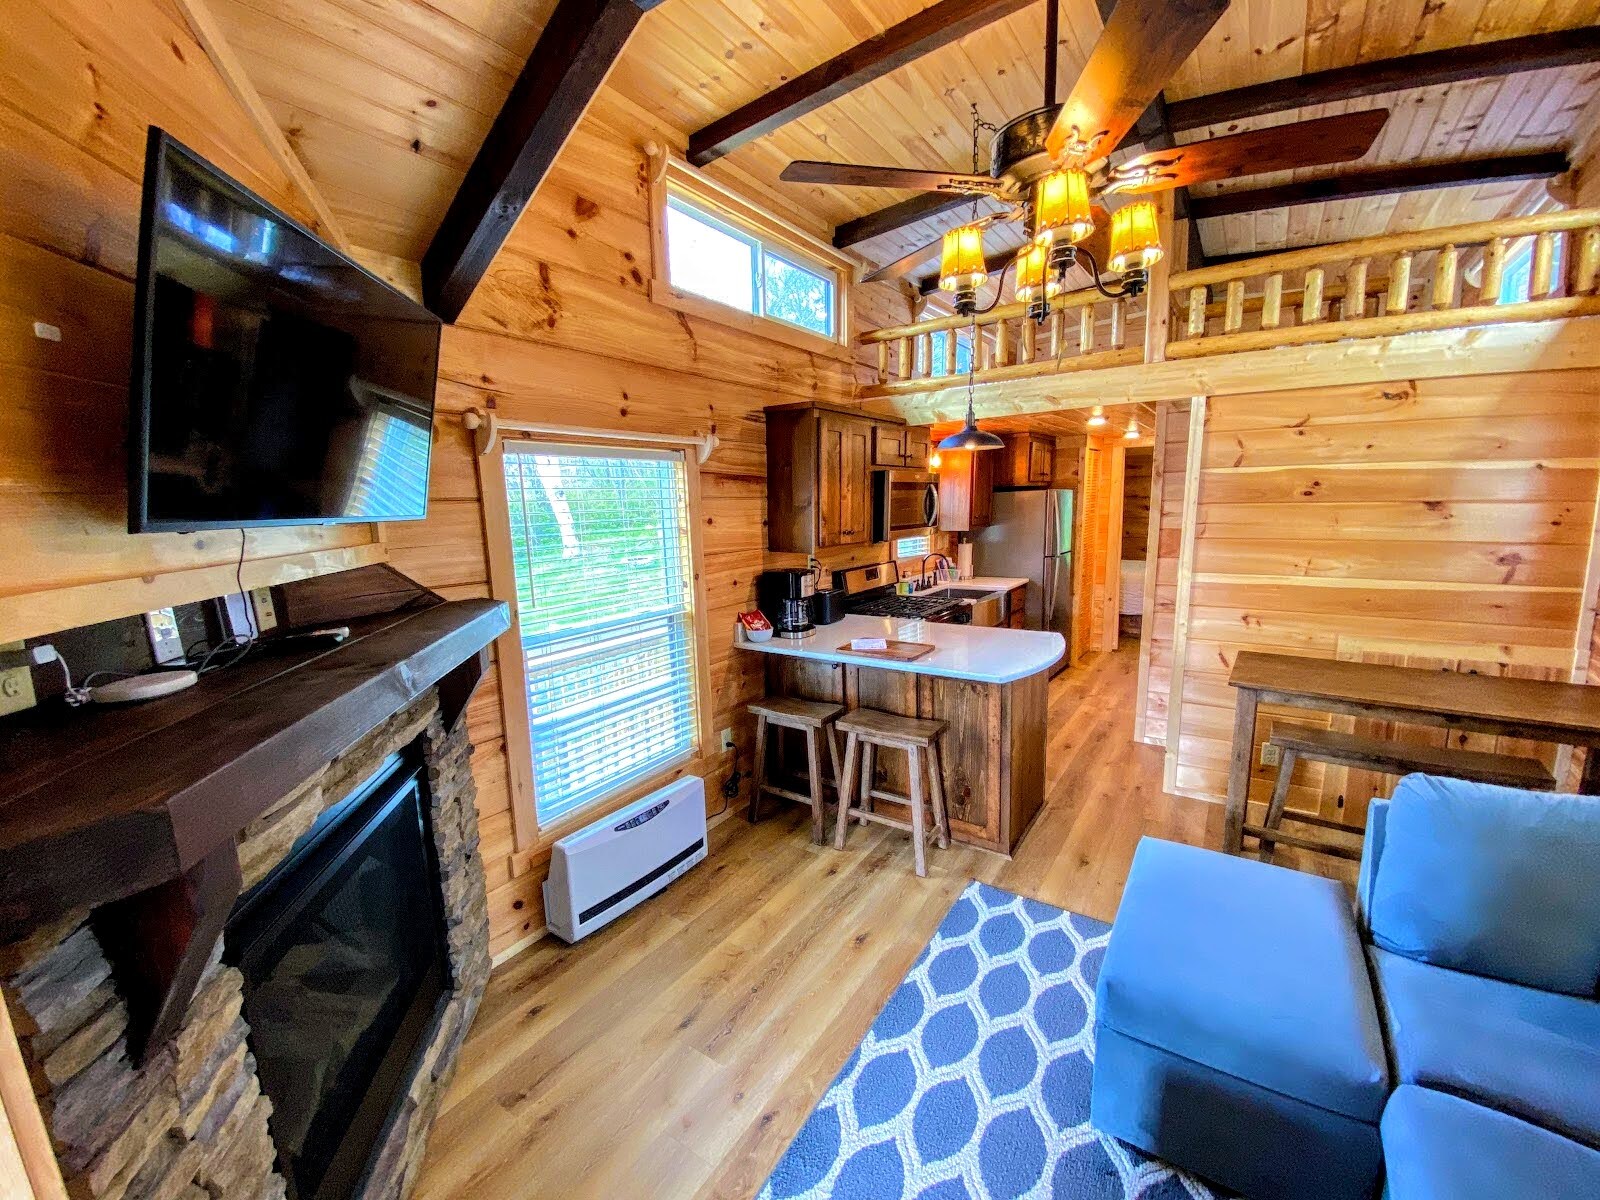 With AC, high speed fiber optic internet, gas fireplaces, and keyless entry, the tiny homes are a modern way to get in touch with nature and enjoy a short or long-term stay in one of the most beautiful areas of the country!